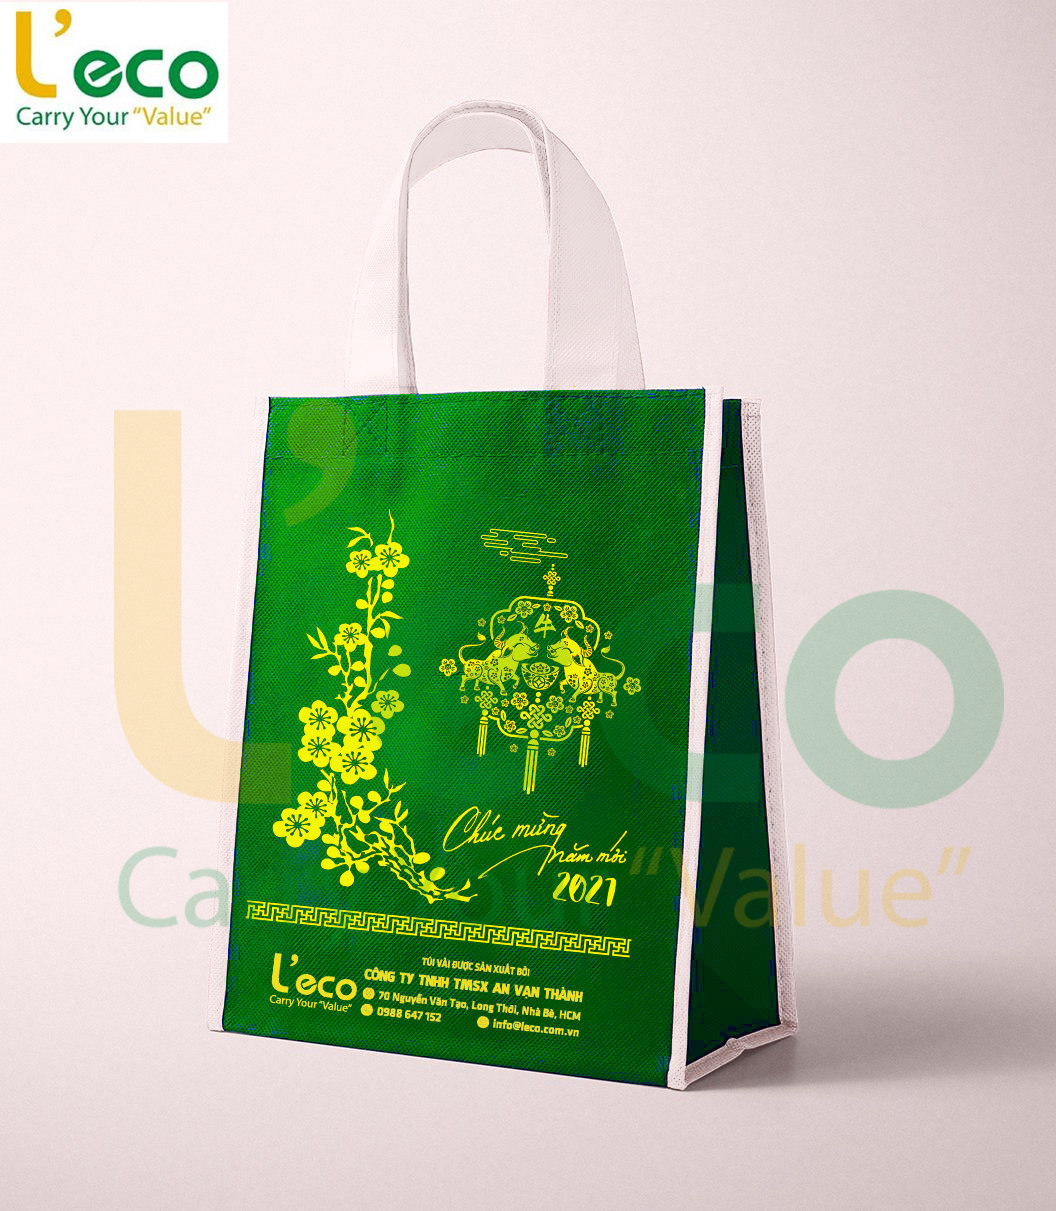 CHOOSE A GIFT BAG FOR LOVE TET HOLIDAY